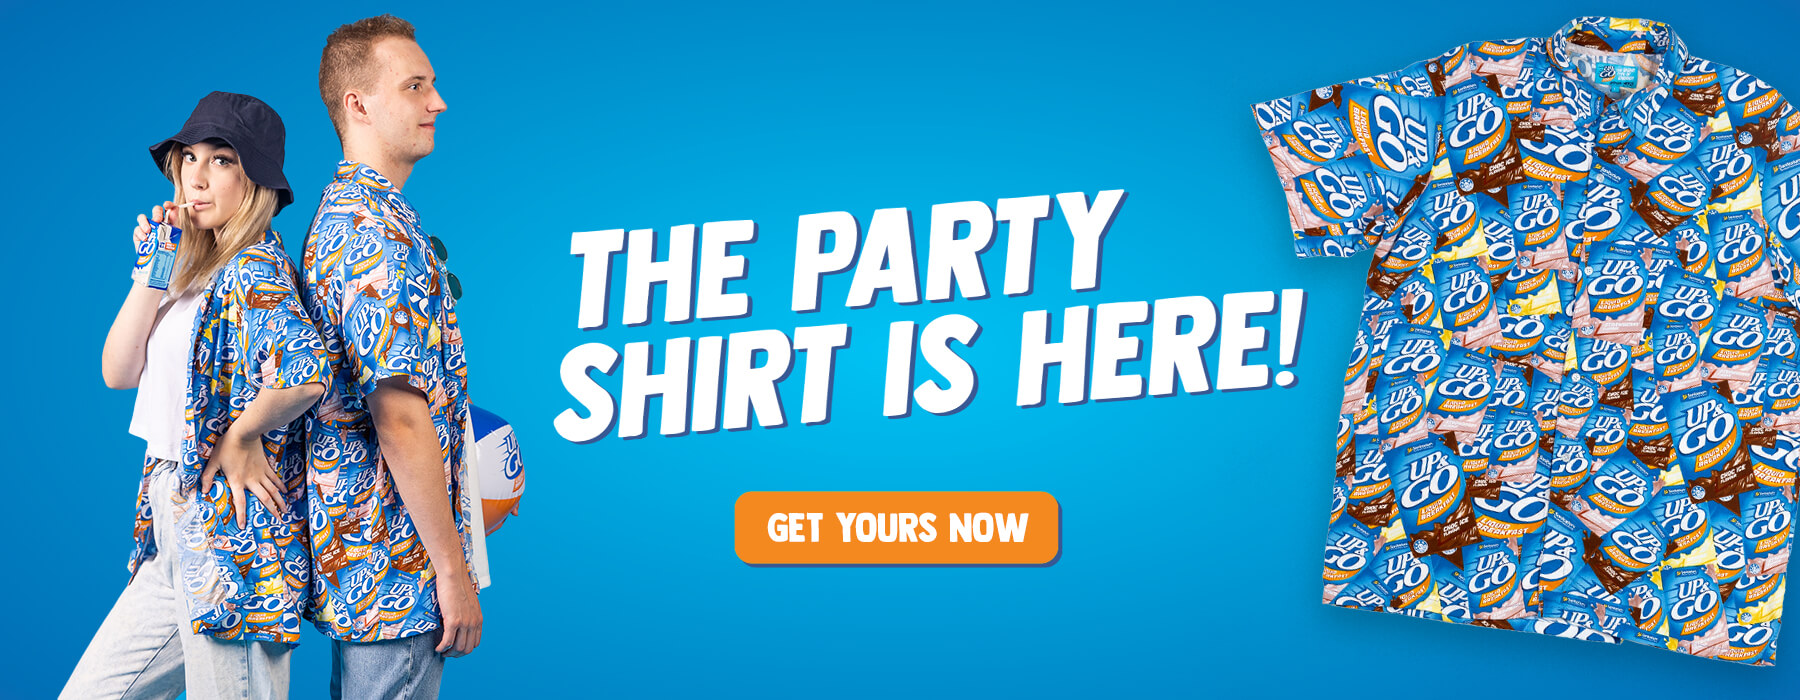 UP&GO Party Shirt